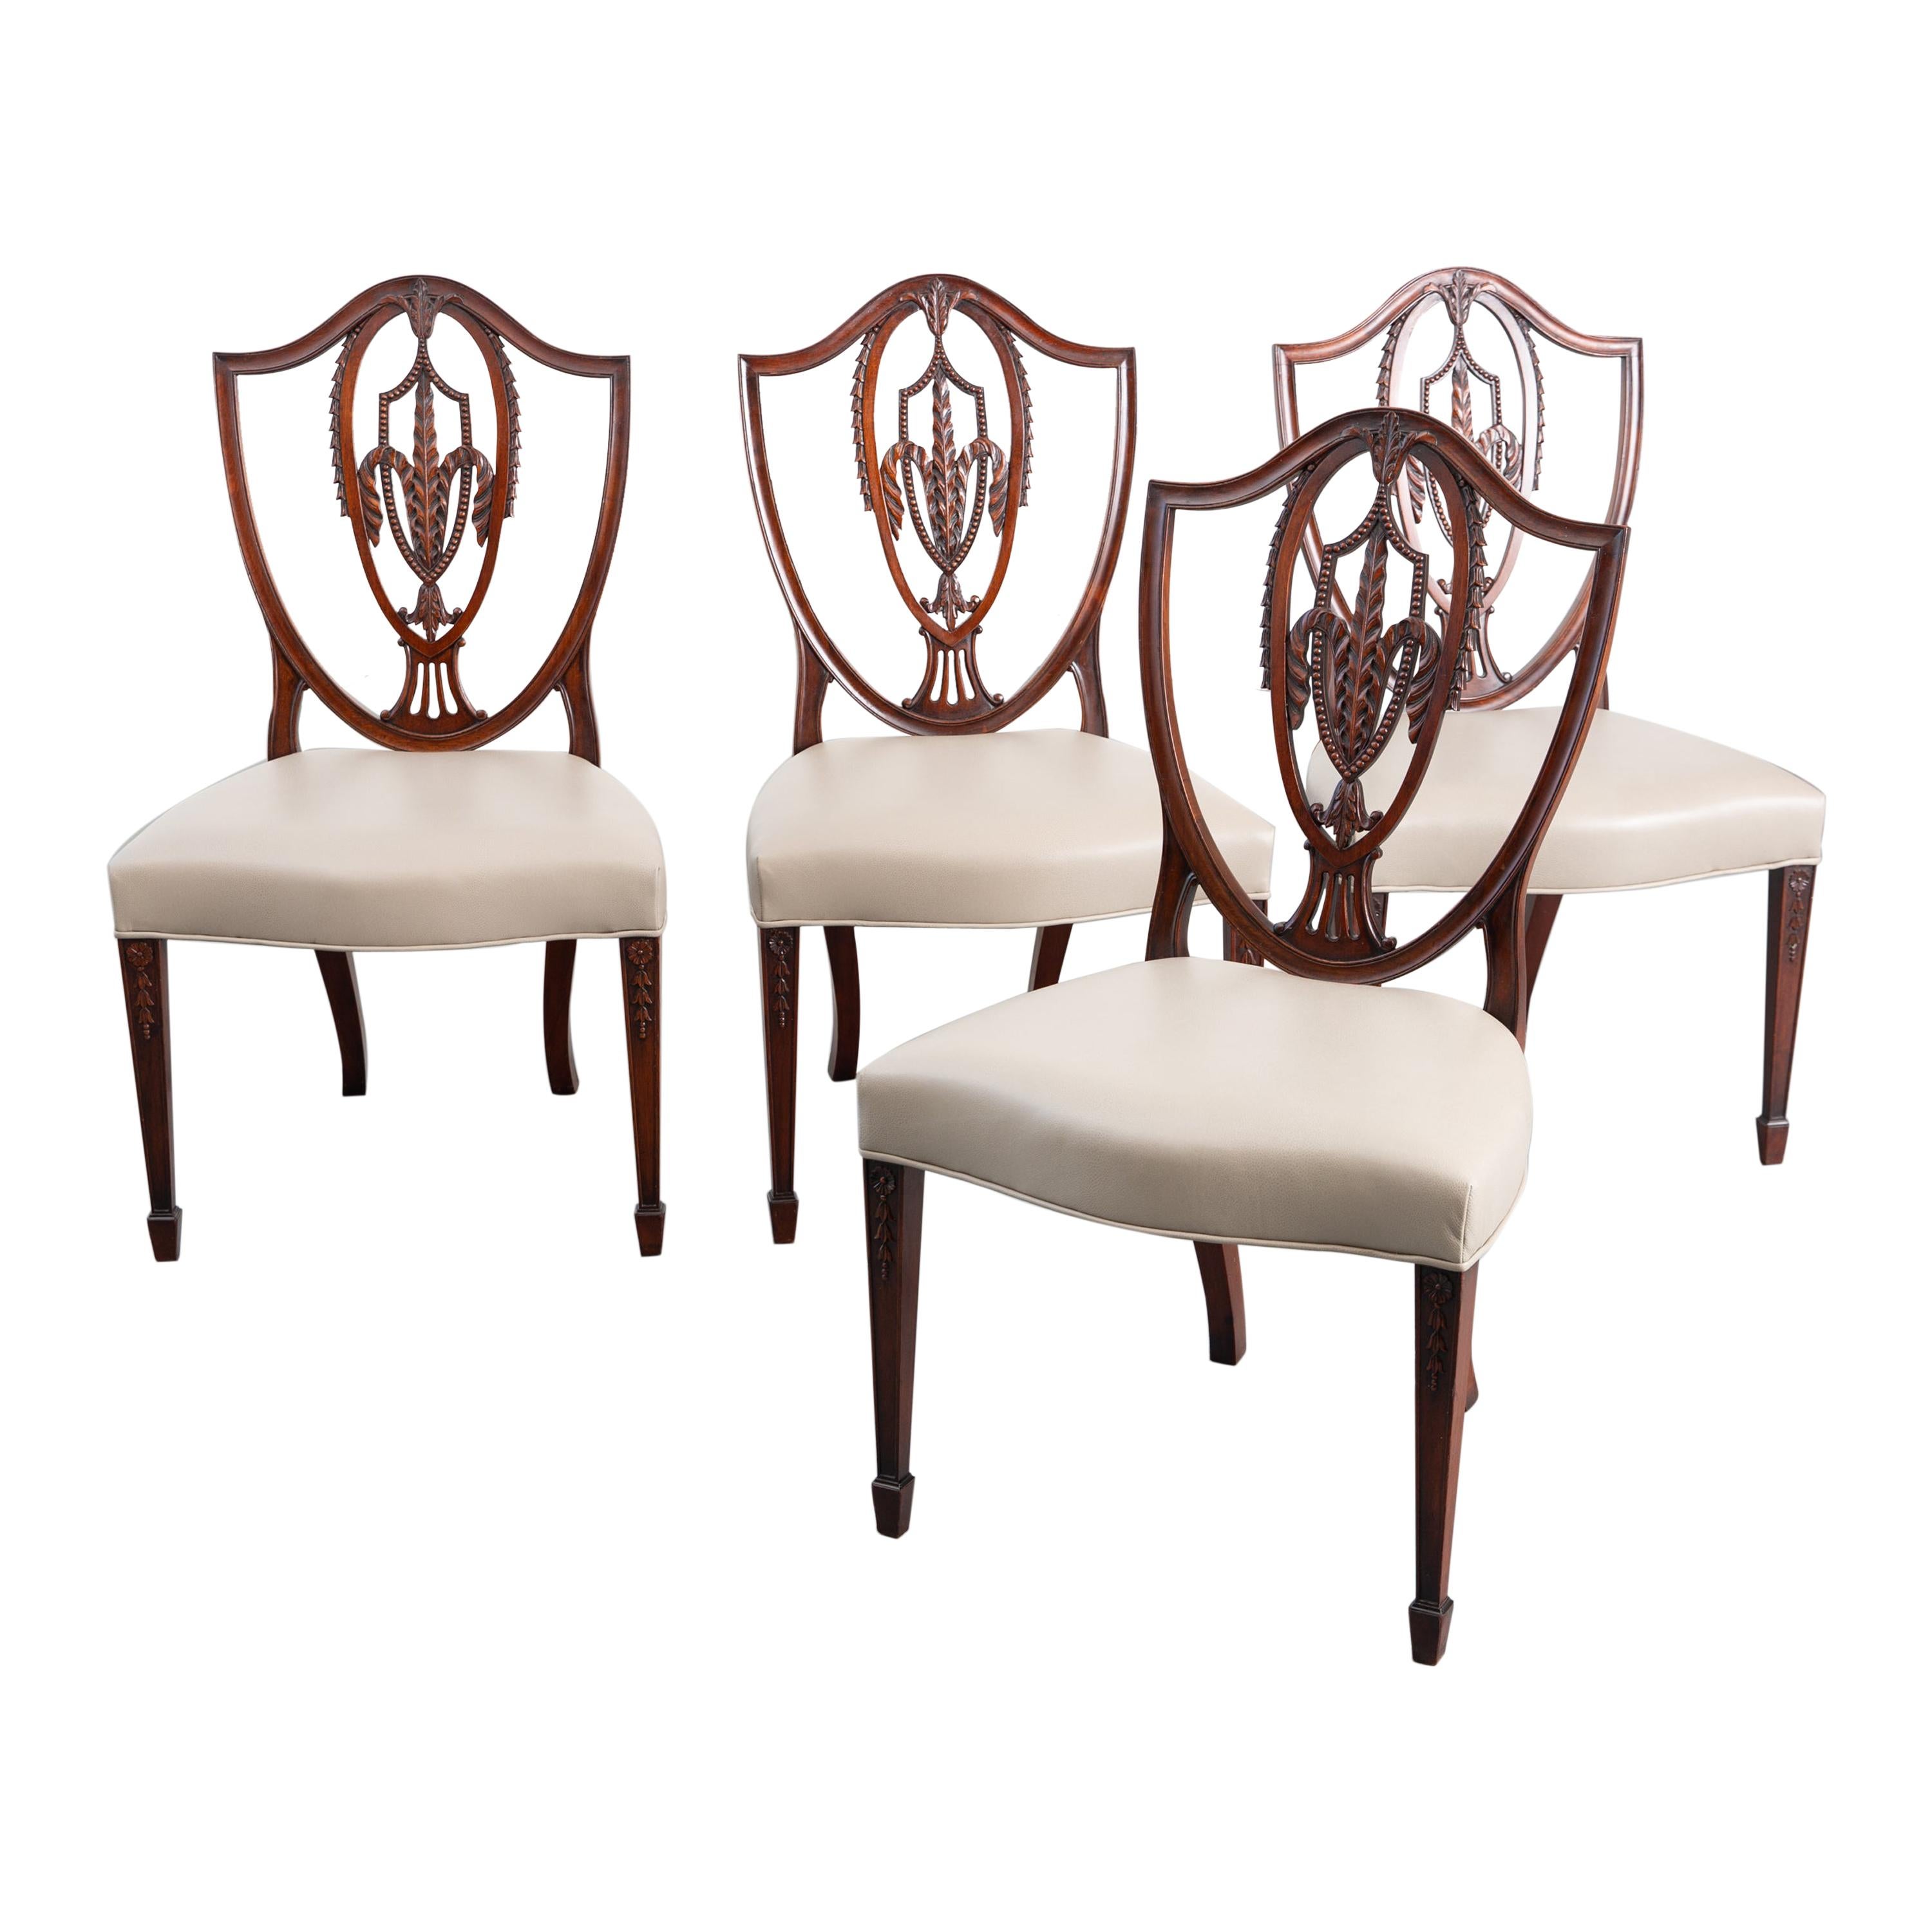 Fine Set of 4 Federal Hemplewhite Style Carved Wood Dining Chairs